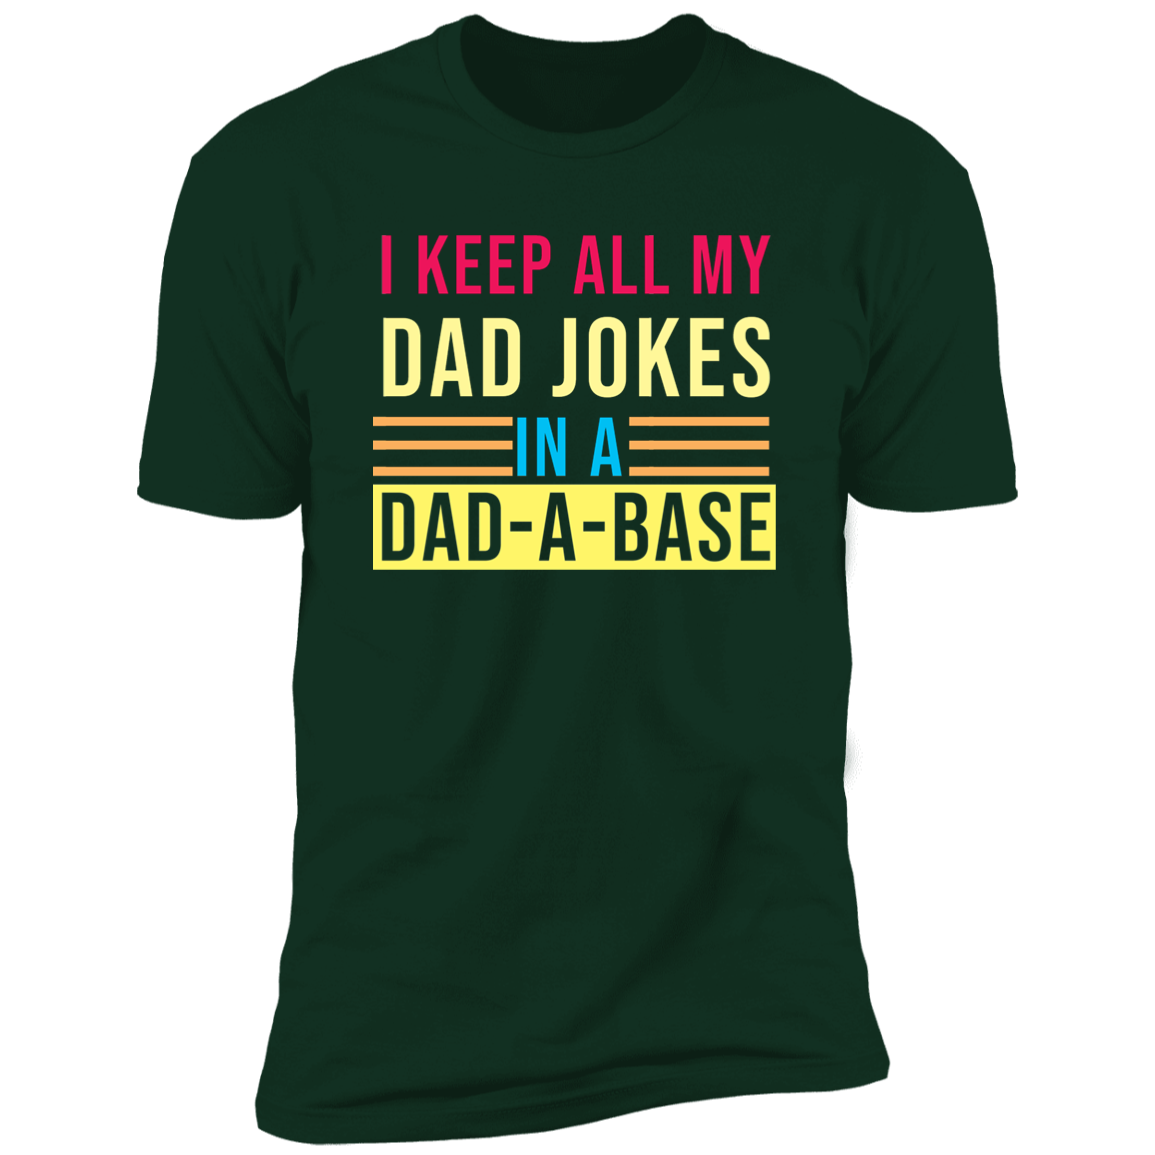 I Keep My Dad Jokes in A Dad-A-Base T-Shirt